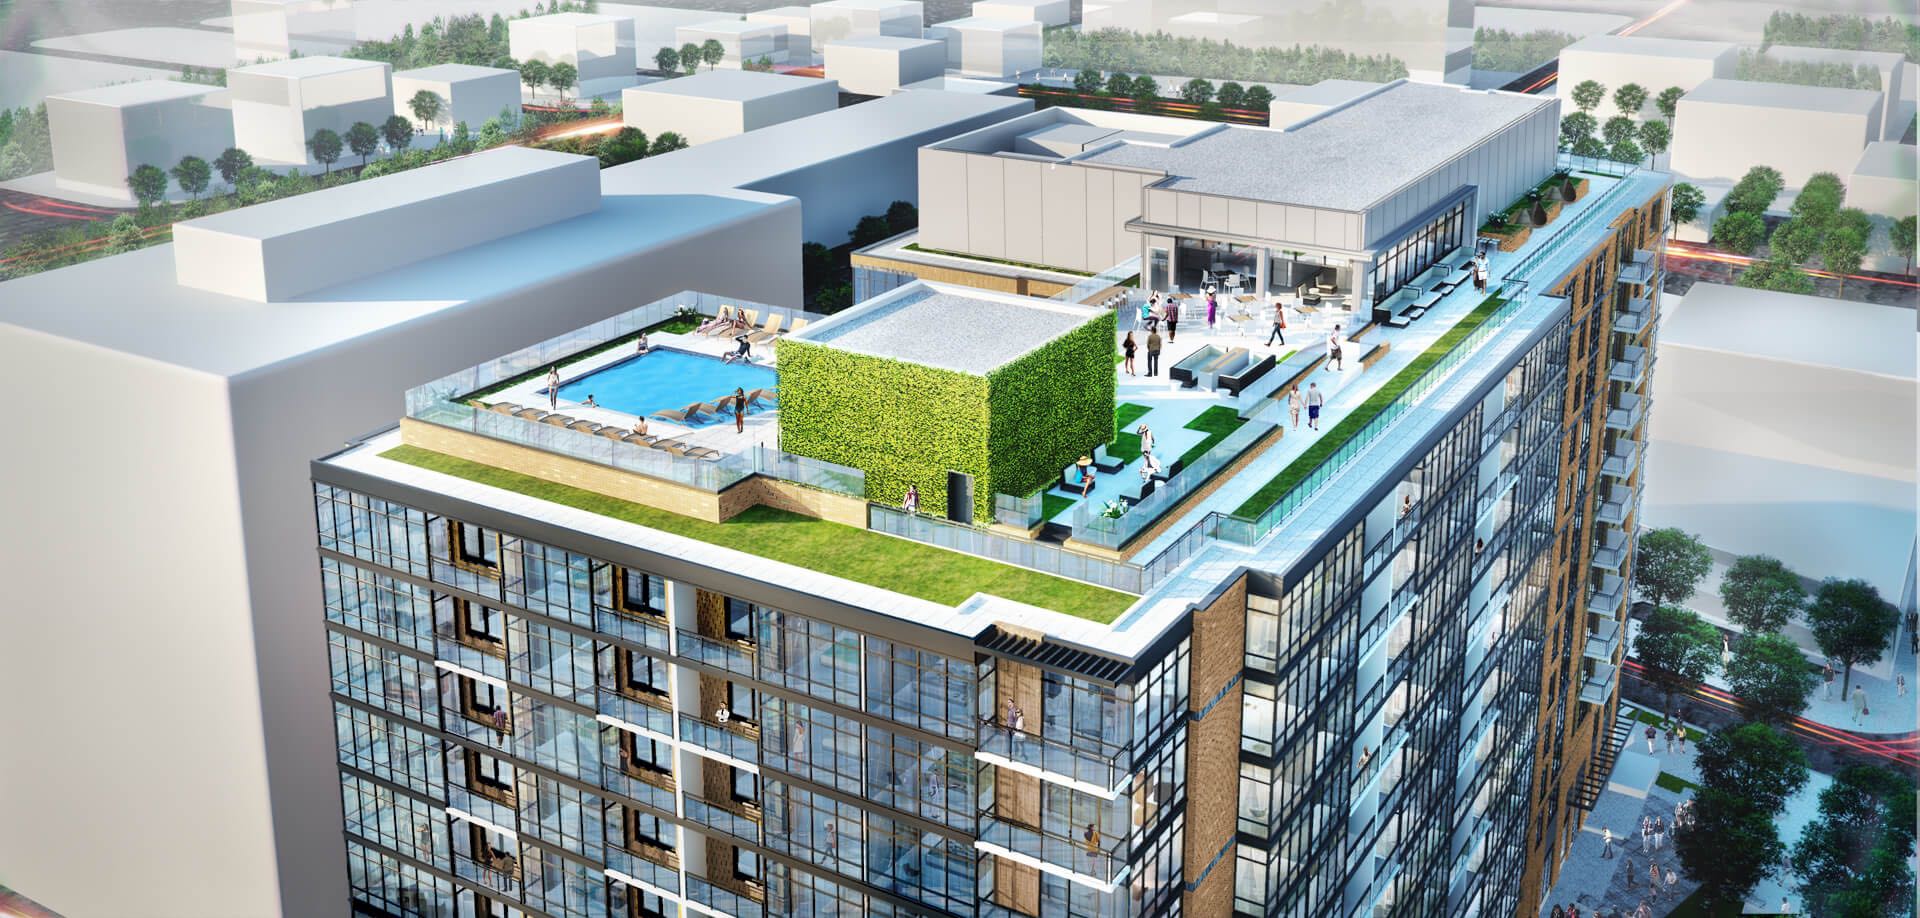 5 Stellar Amenities Your Navy Yard Apartment Can’t Be Without